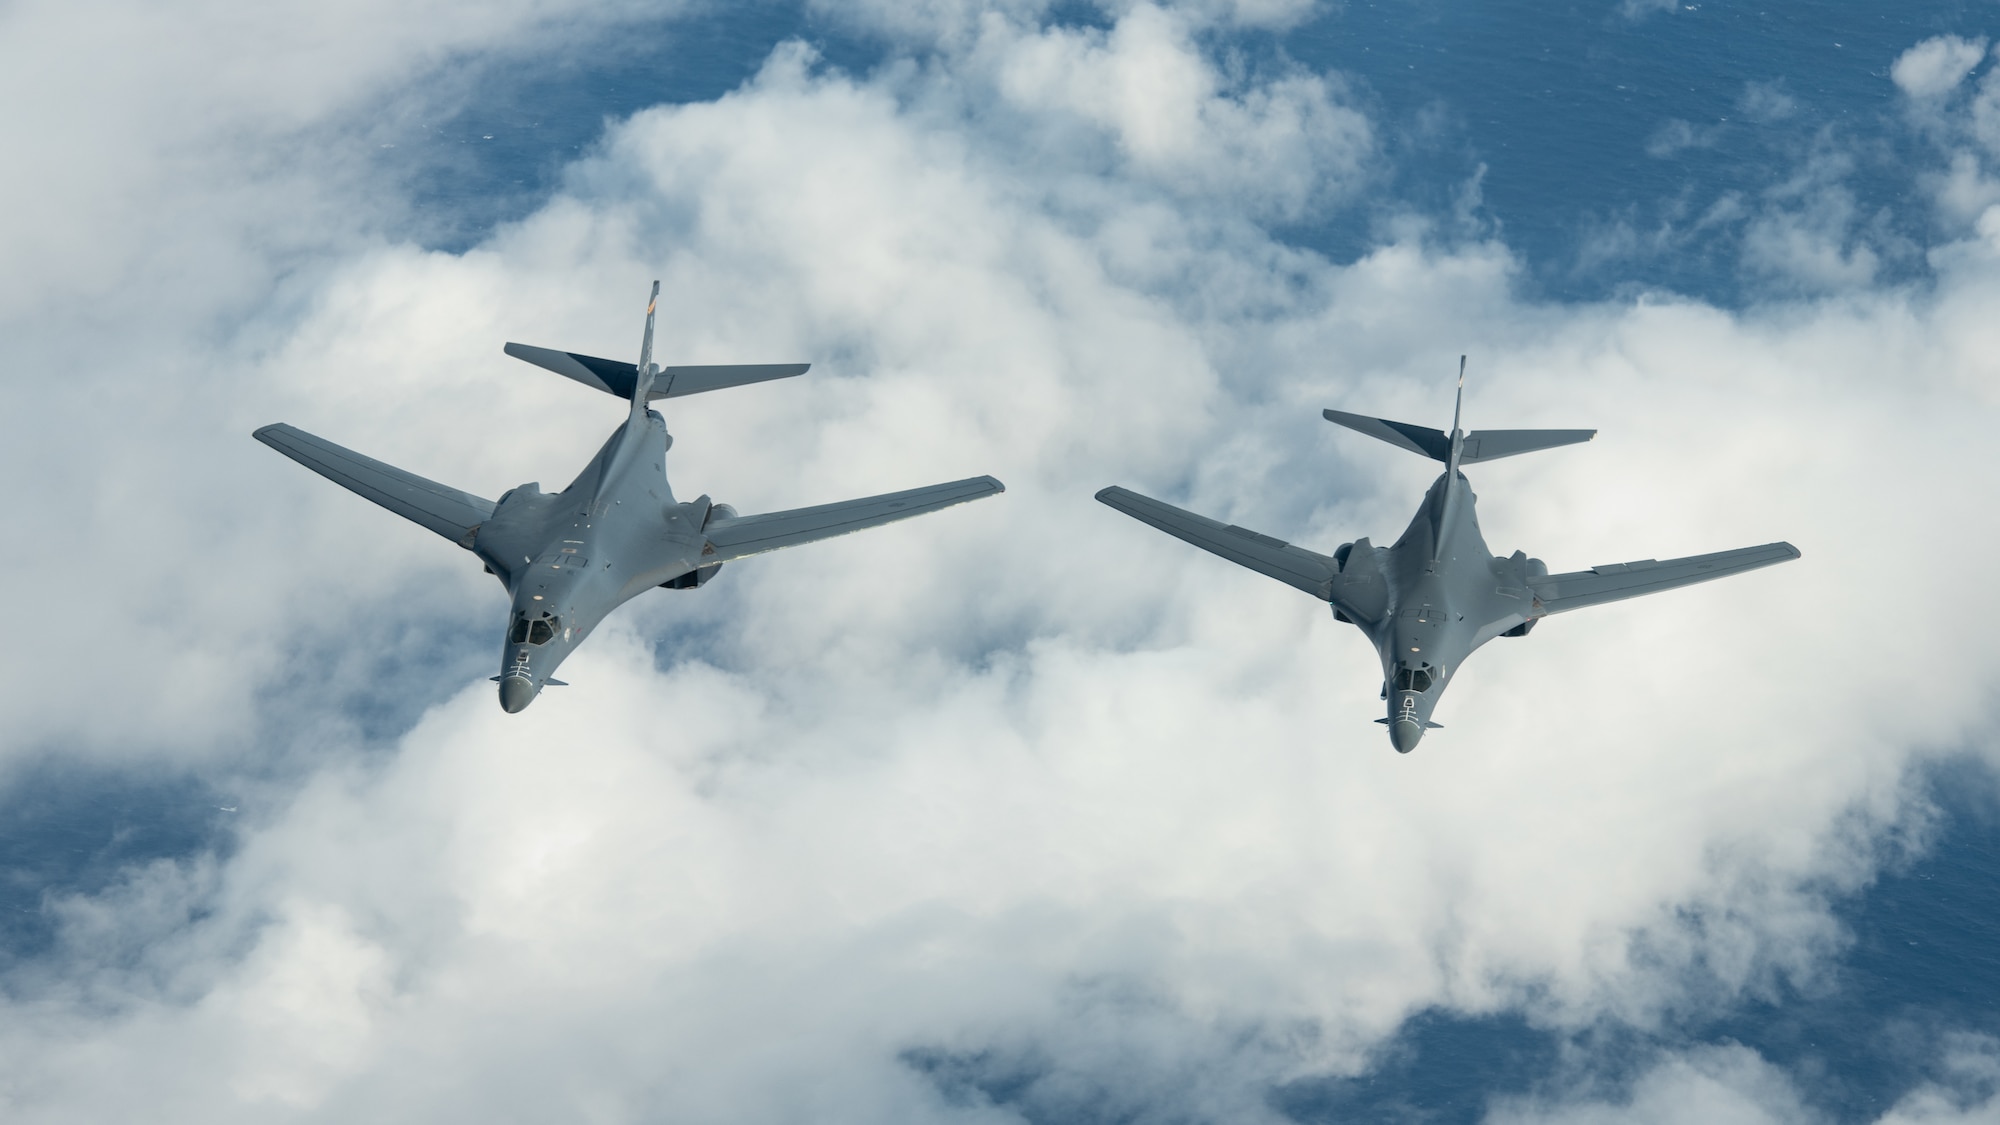 U.S. Air Force B-1B Lancers participate in a joint training exercise during a Bomber Task Force deployment, Nov. 13, 2020, over the Pacific Ocean. Bomber Task Force missions demonstrate U.S. commitment to allies and partners throughout the Indo-Pacific area of responsibility and the ability of Air Force Global Strike Command to deliver lethal strike options for combatant commanders at a moment’s notice. (U.S. Air Force photo by Staff Sgt. Peter Reft)